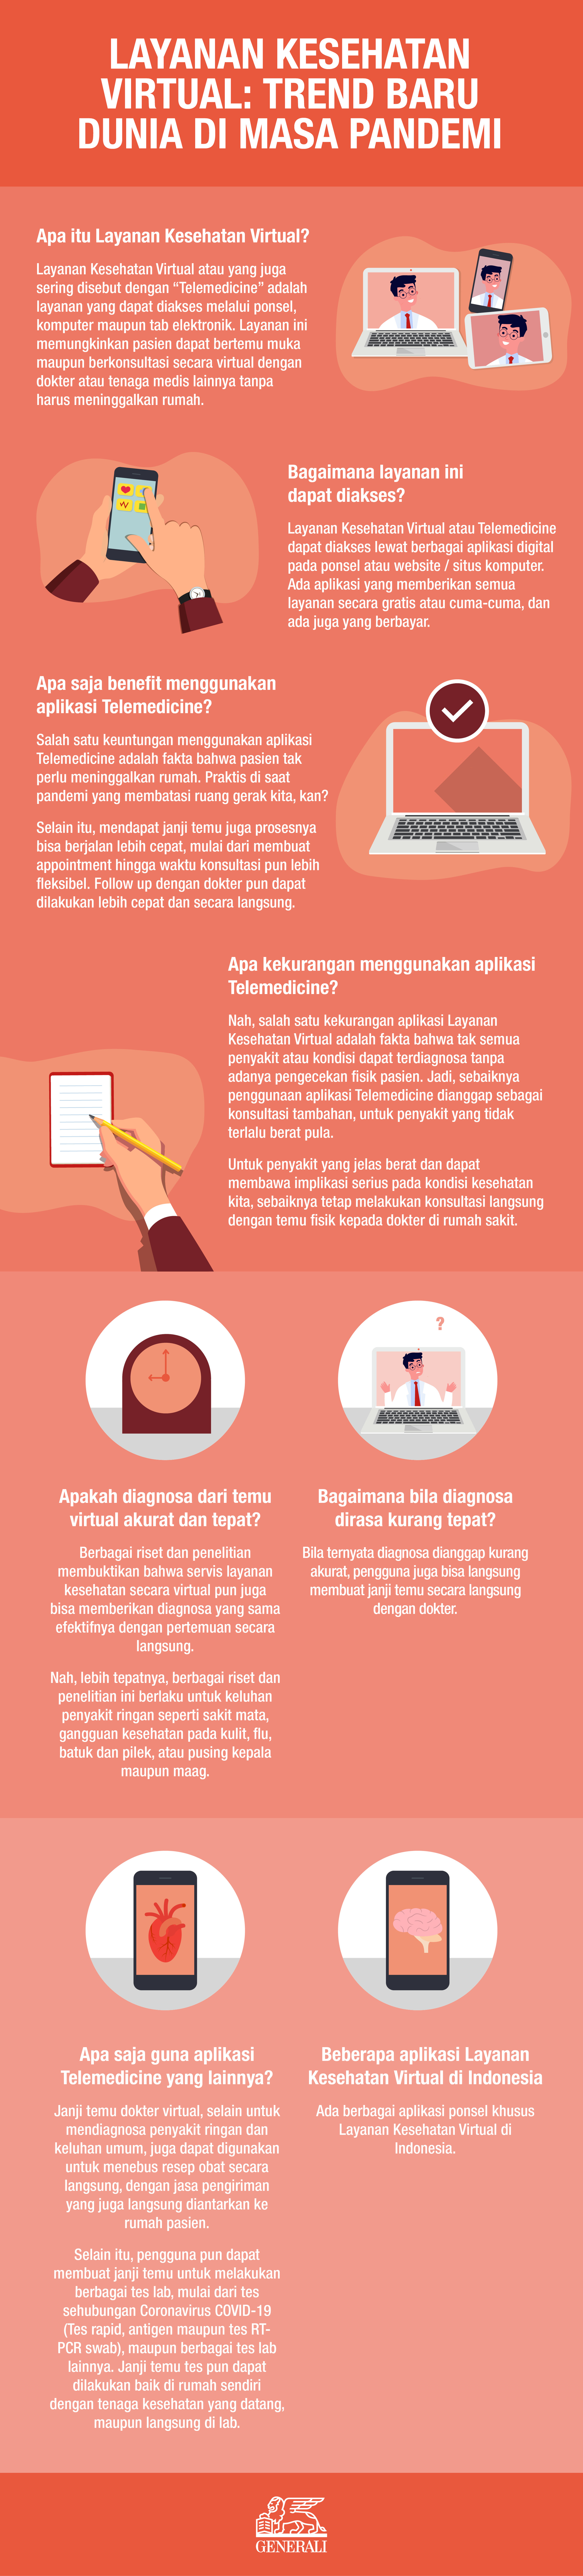 Generali_The Rise in Virtual Healthcare_Infographic_INDONESIA_07.07.21.jpg